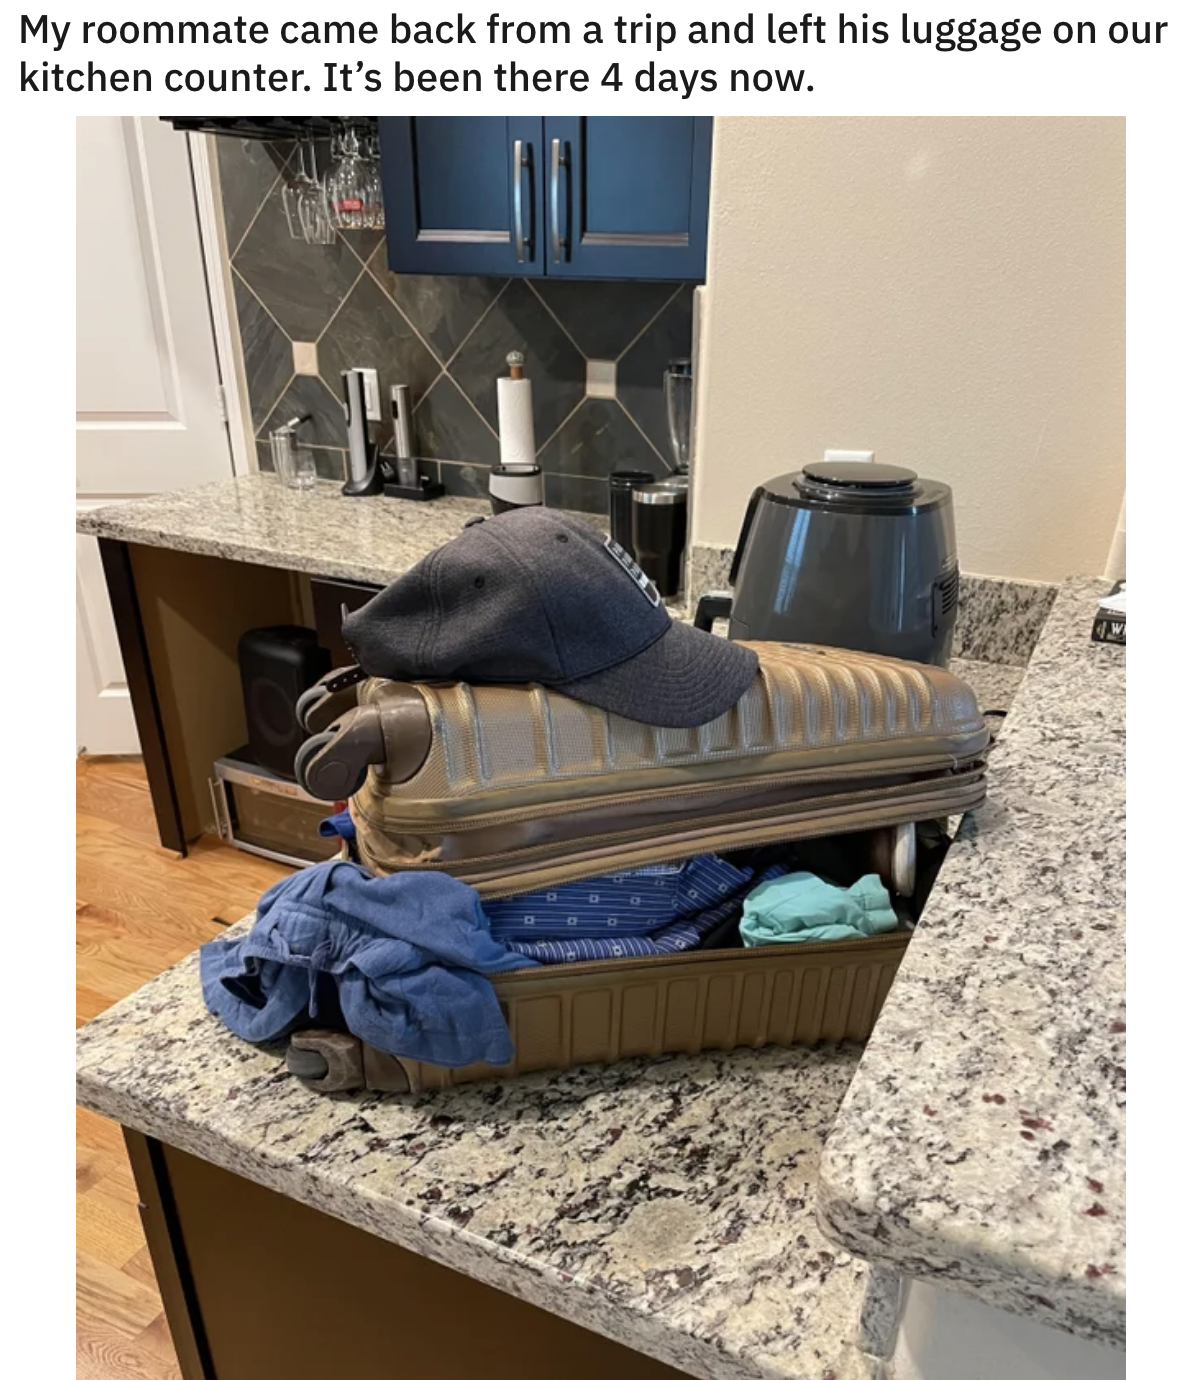 opened luggage left on the kitchen counter